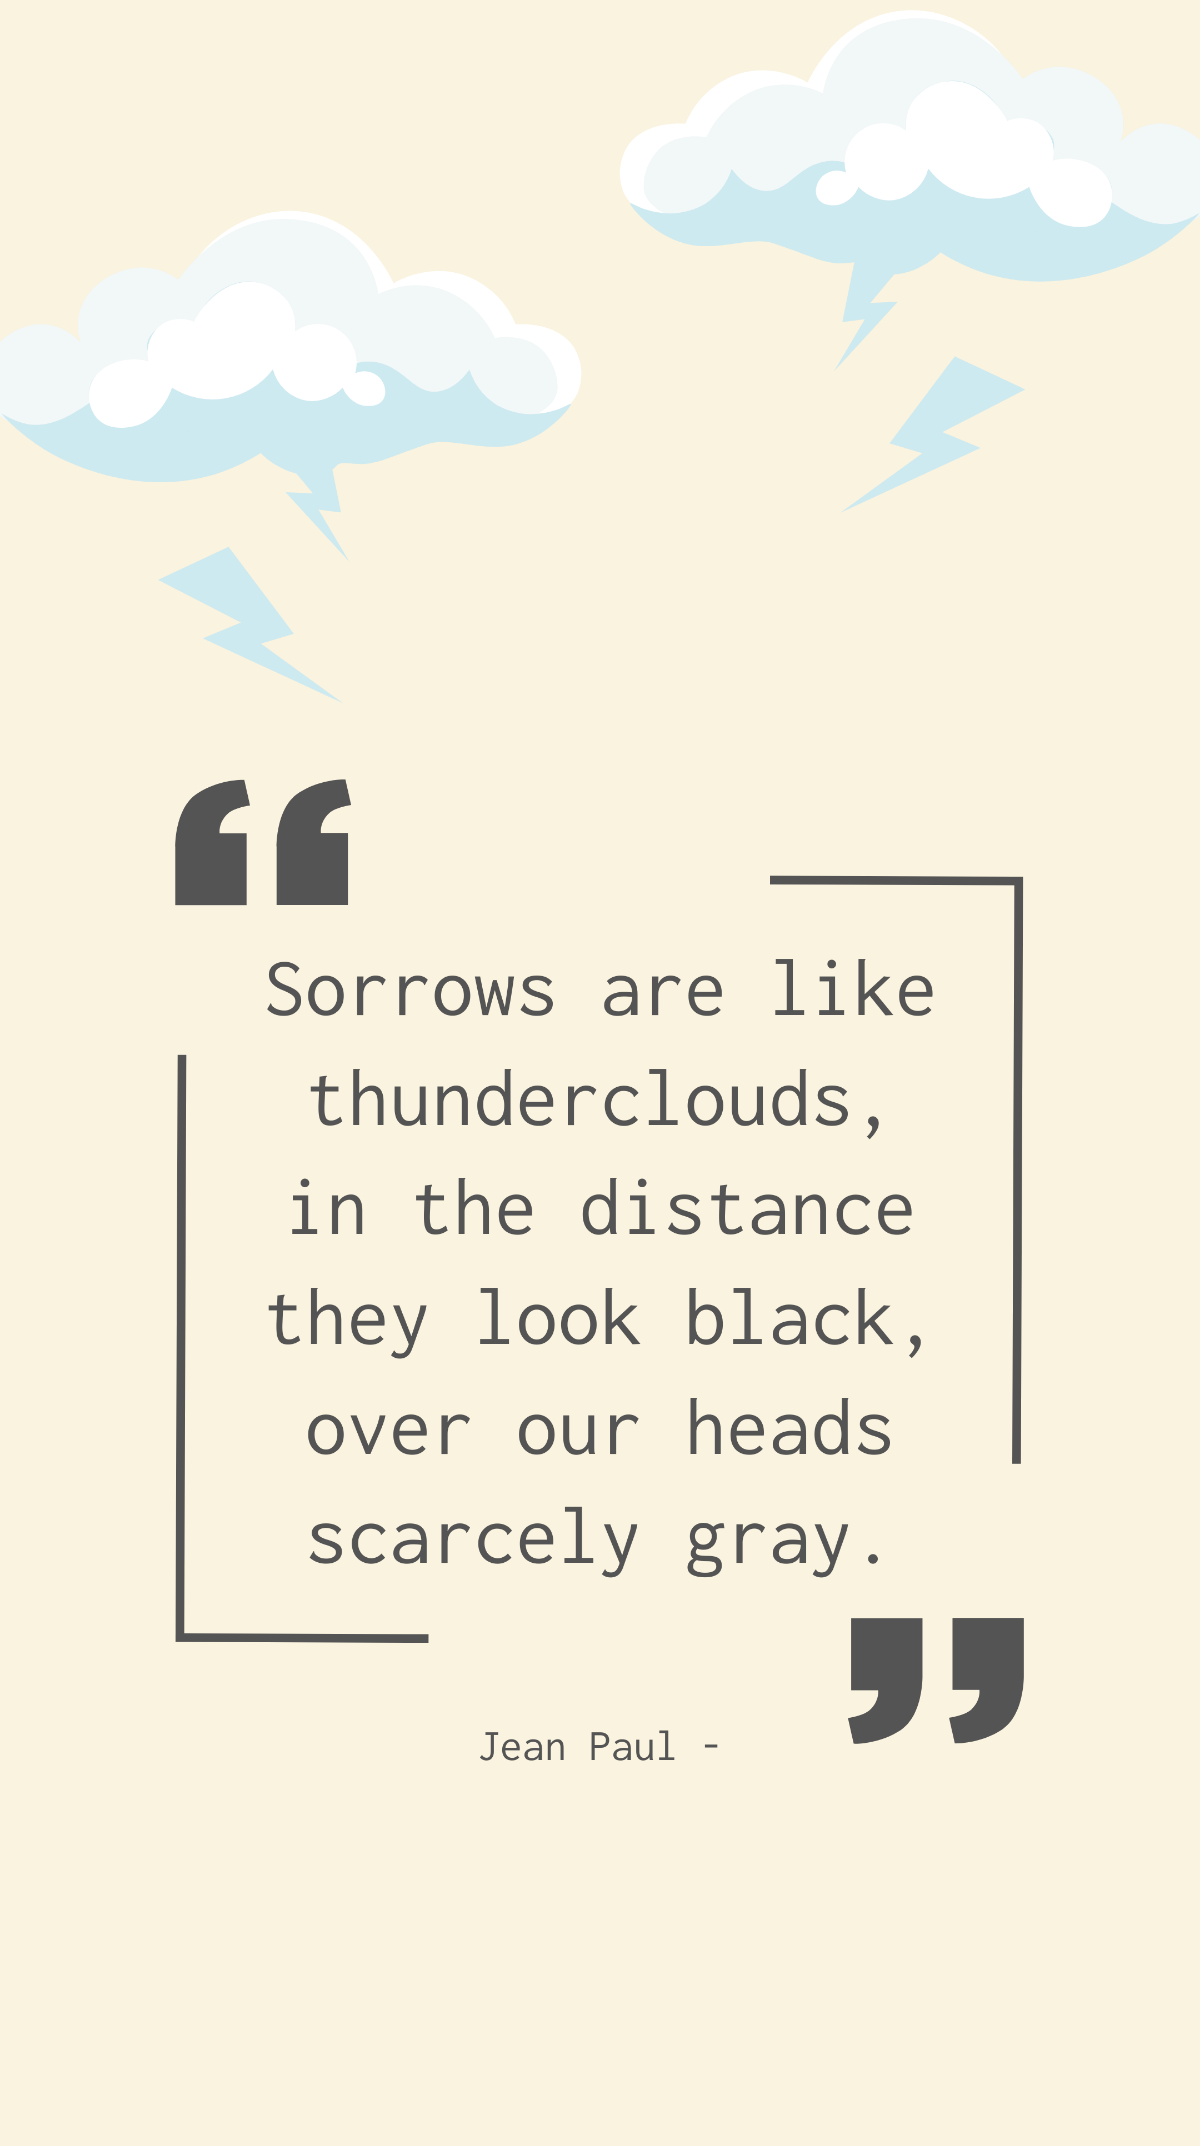 Jean Paul - Sorrows are like thunderclouds, in the distance they look black, over our heads scarcely gray. Template